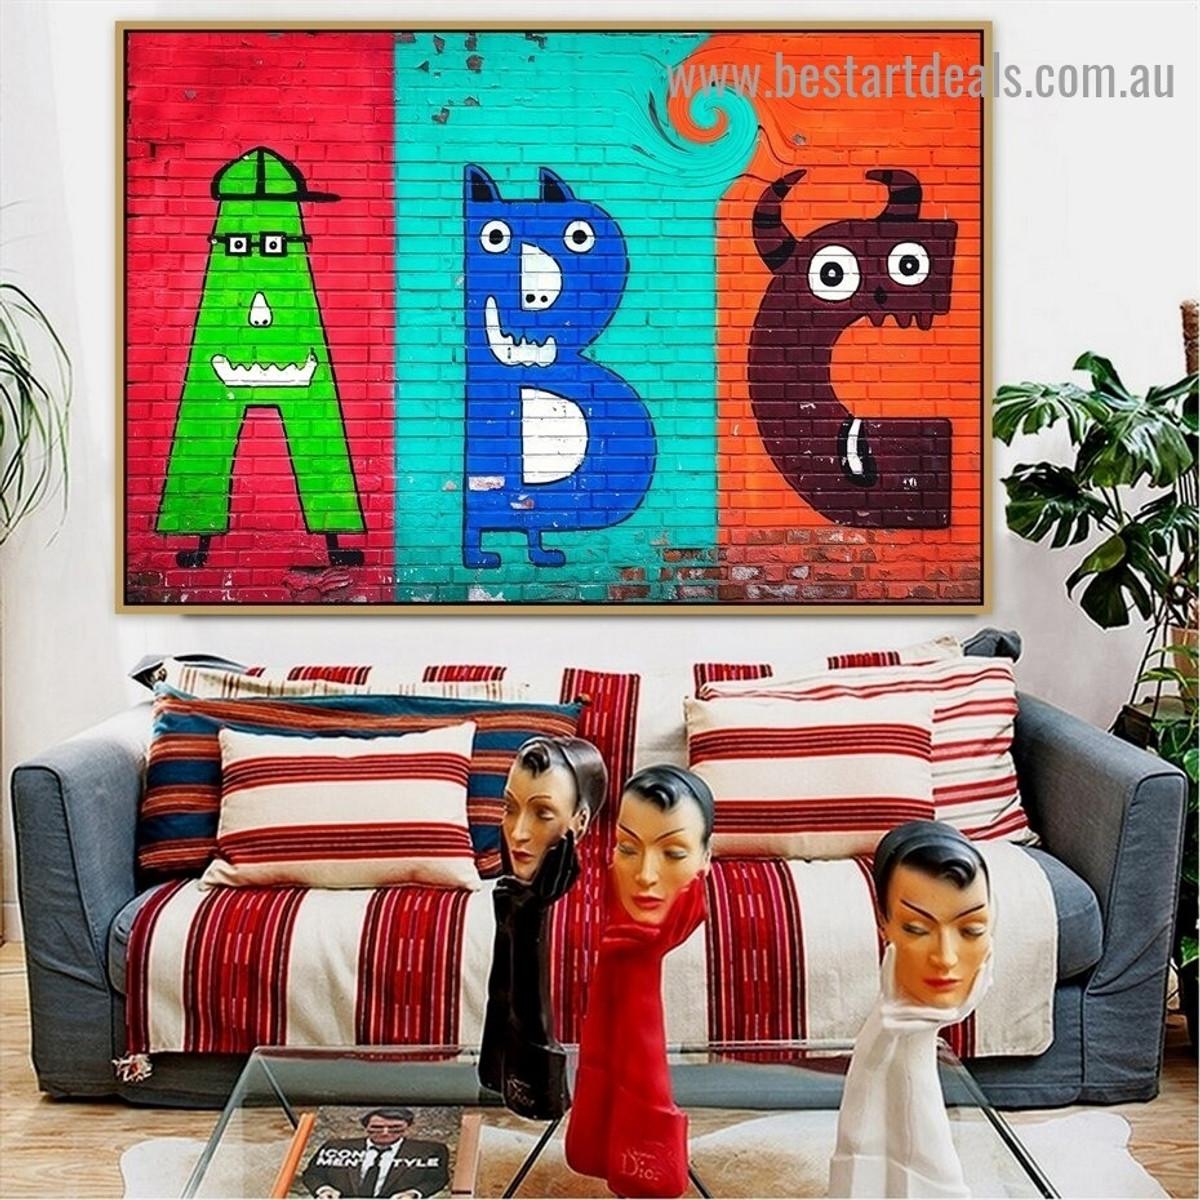 A B C Monsters Kids Typography Graffiti Portrait Painting Canvas Print for Room Wall Décor